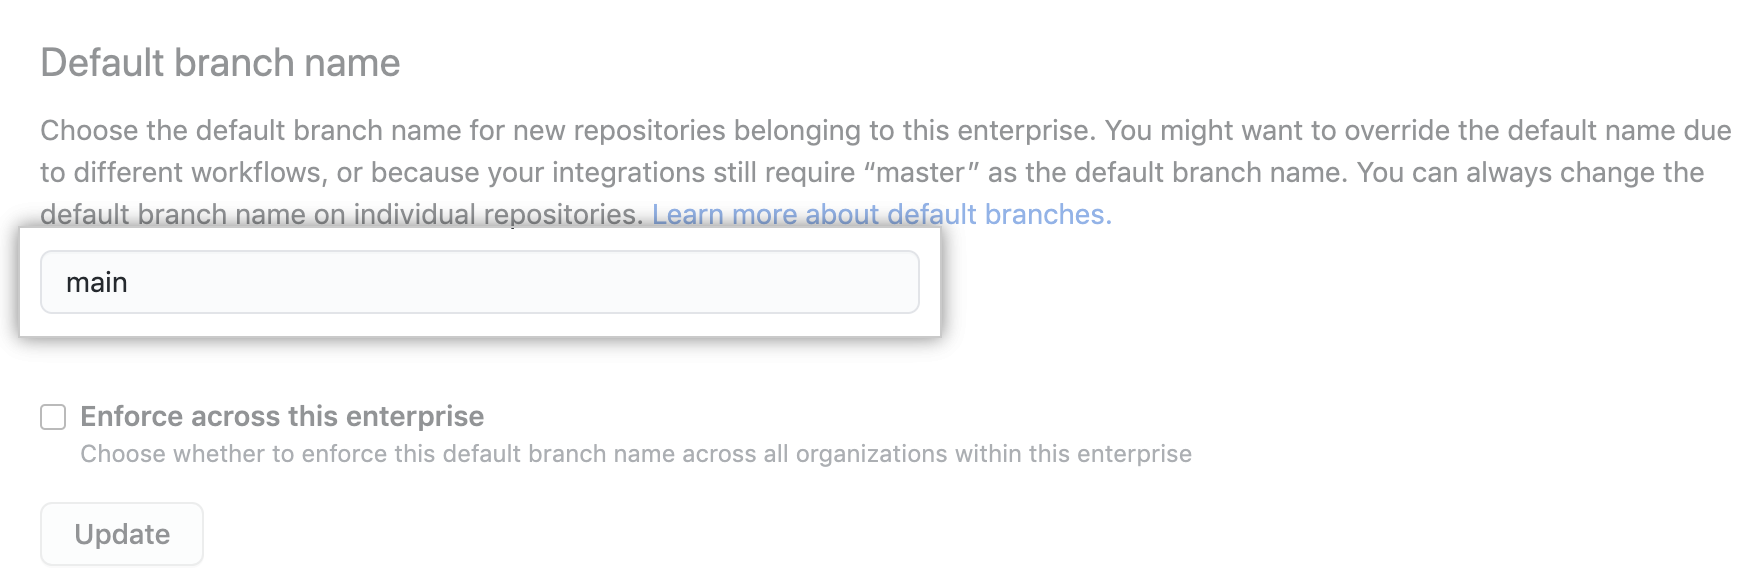 Text box for entering default branch name